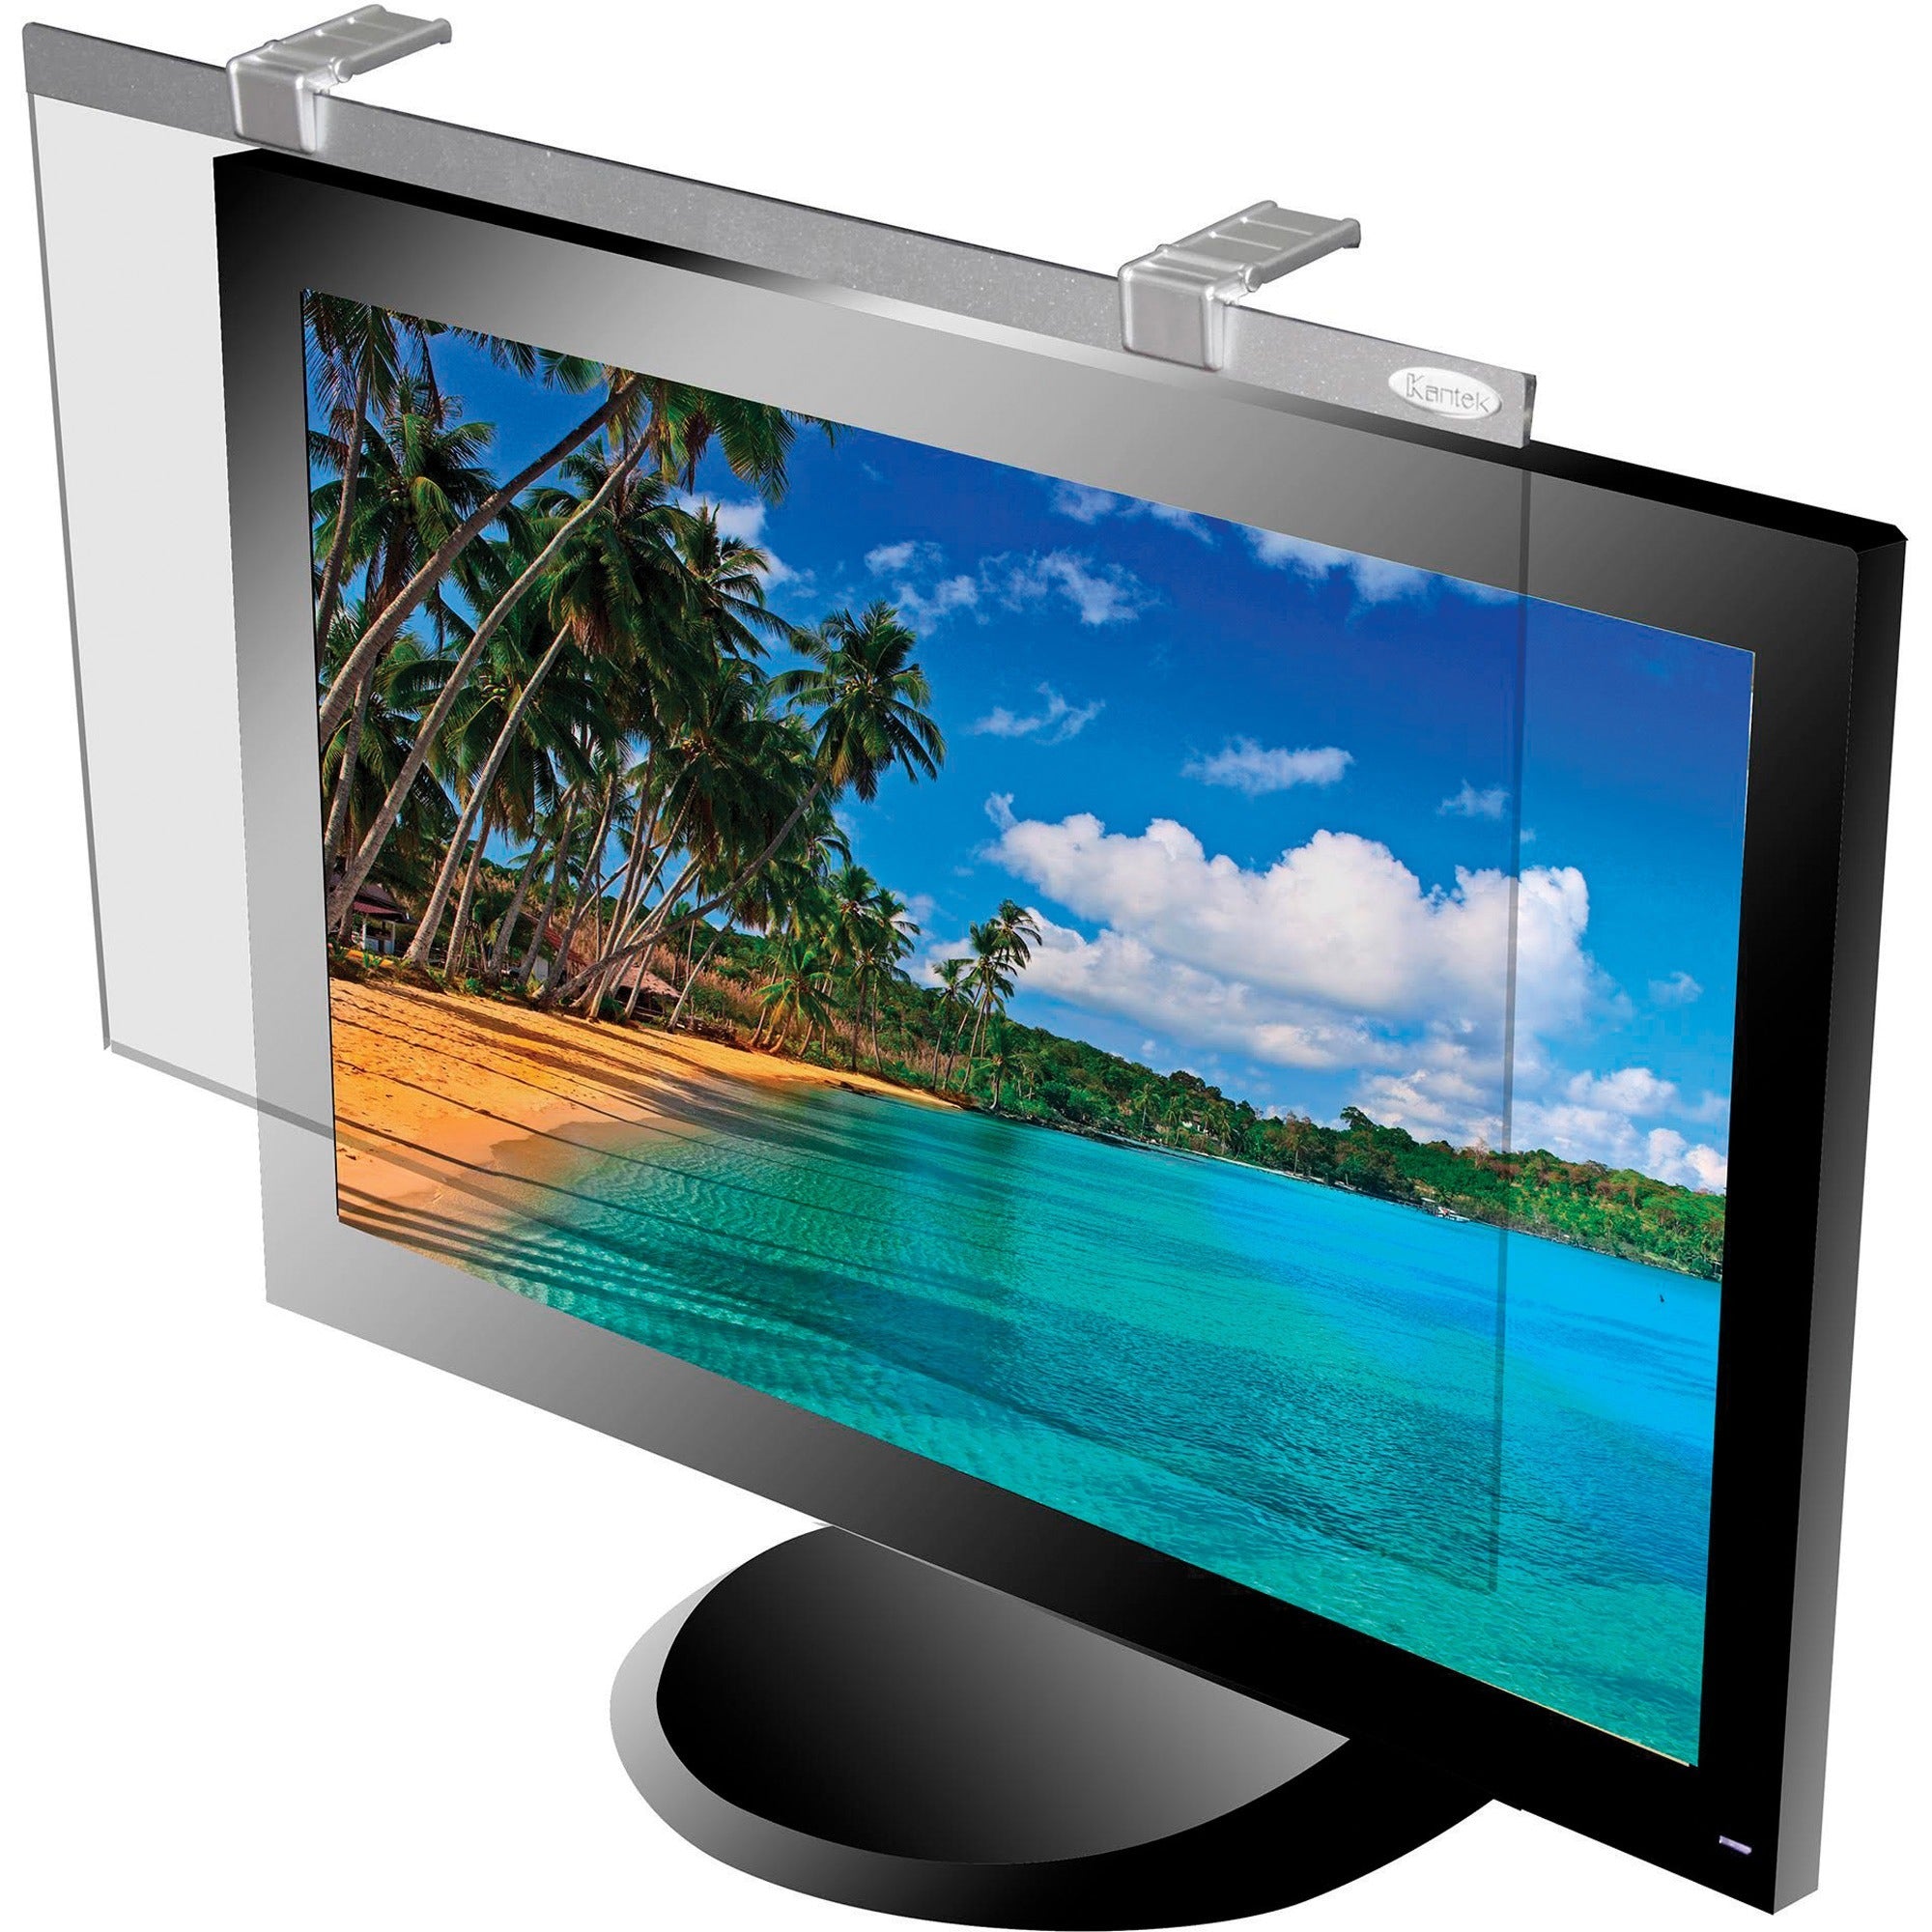 Kantek LCD Protective Filter Silver - For 20" Widescreen Monitor - Scratch Resistant - Anti-glare - 1 Pack - 1